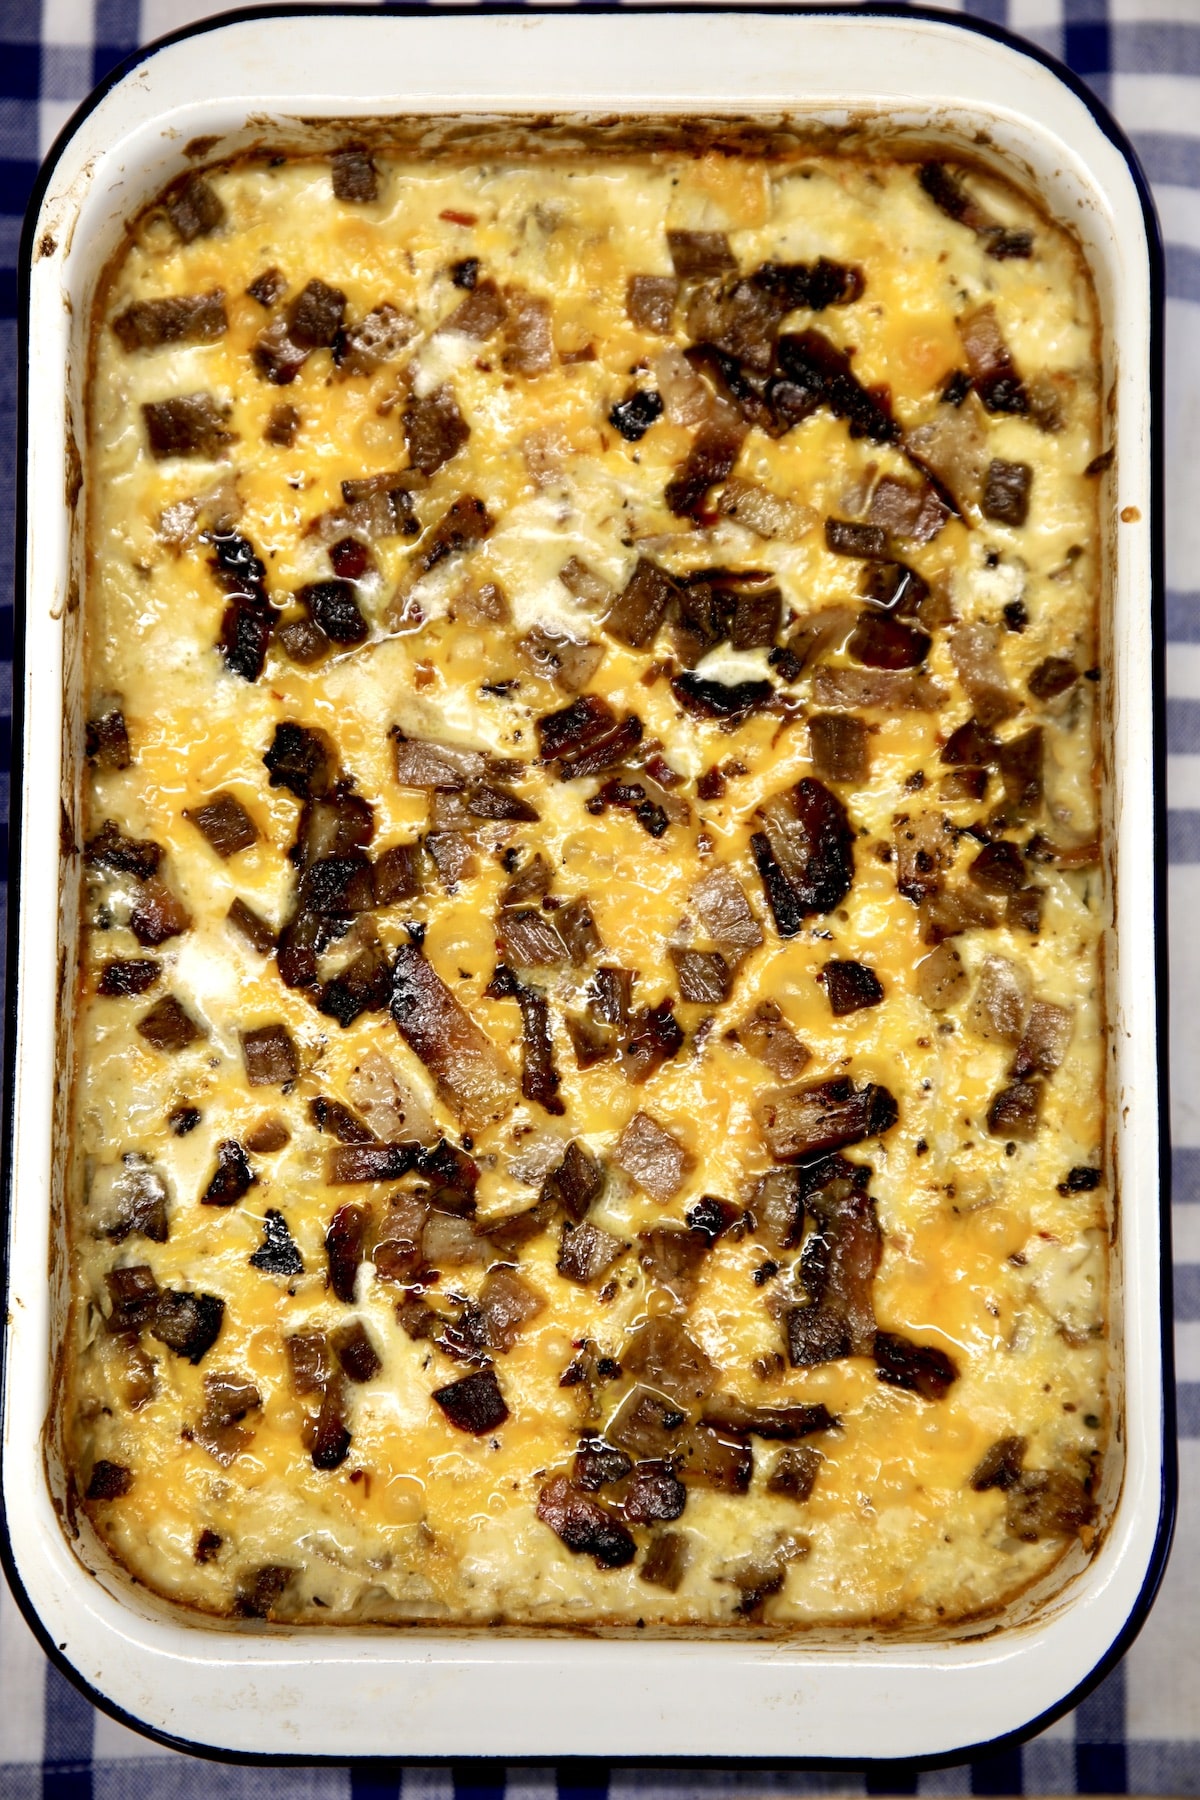 Brisket hashbrown Casserole with cheese.